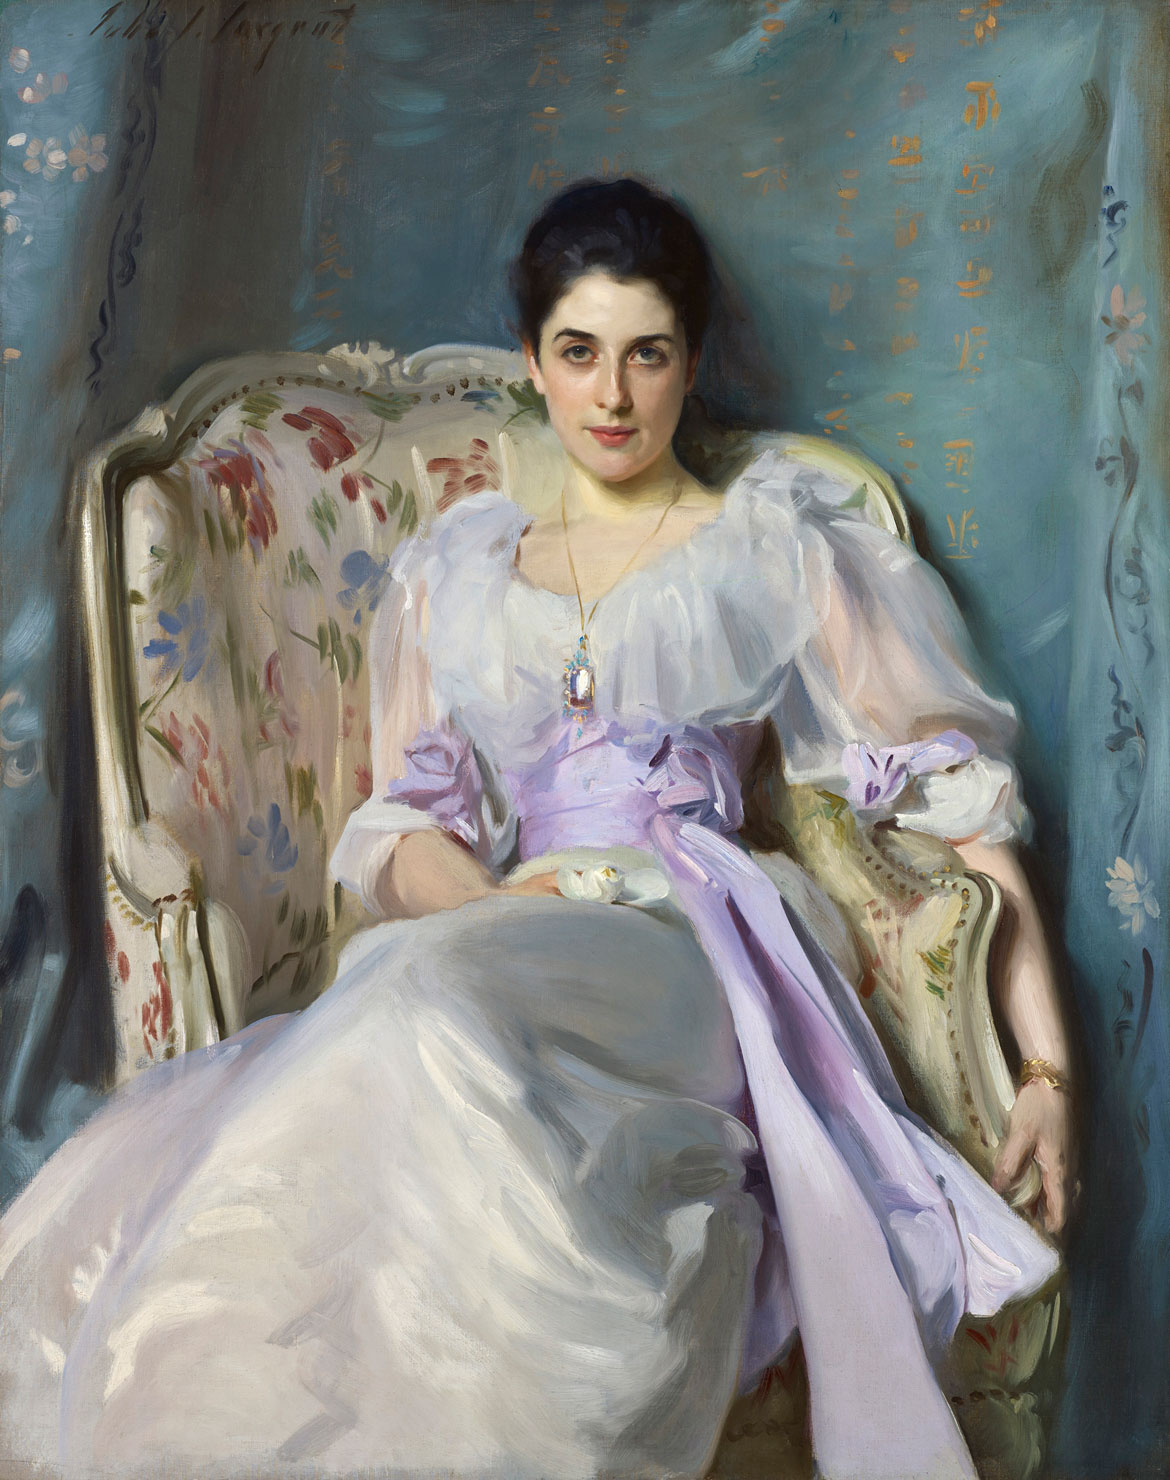 John Singer Sargent, "Lady Agnew of Lochnaw," 1892, oil on canvas.